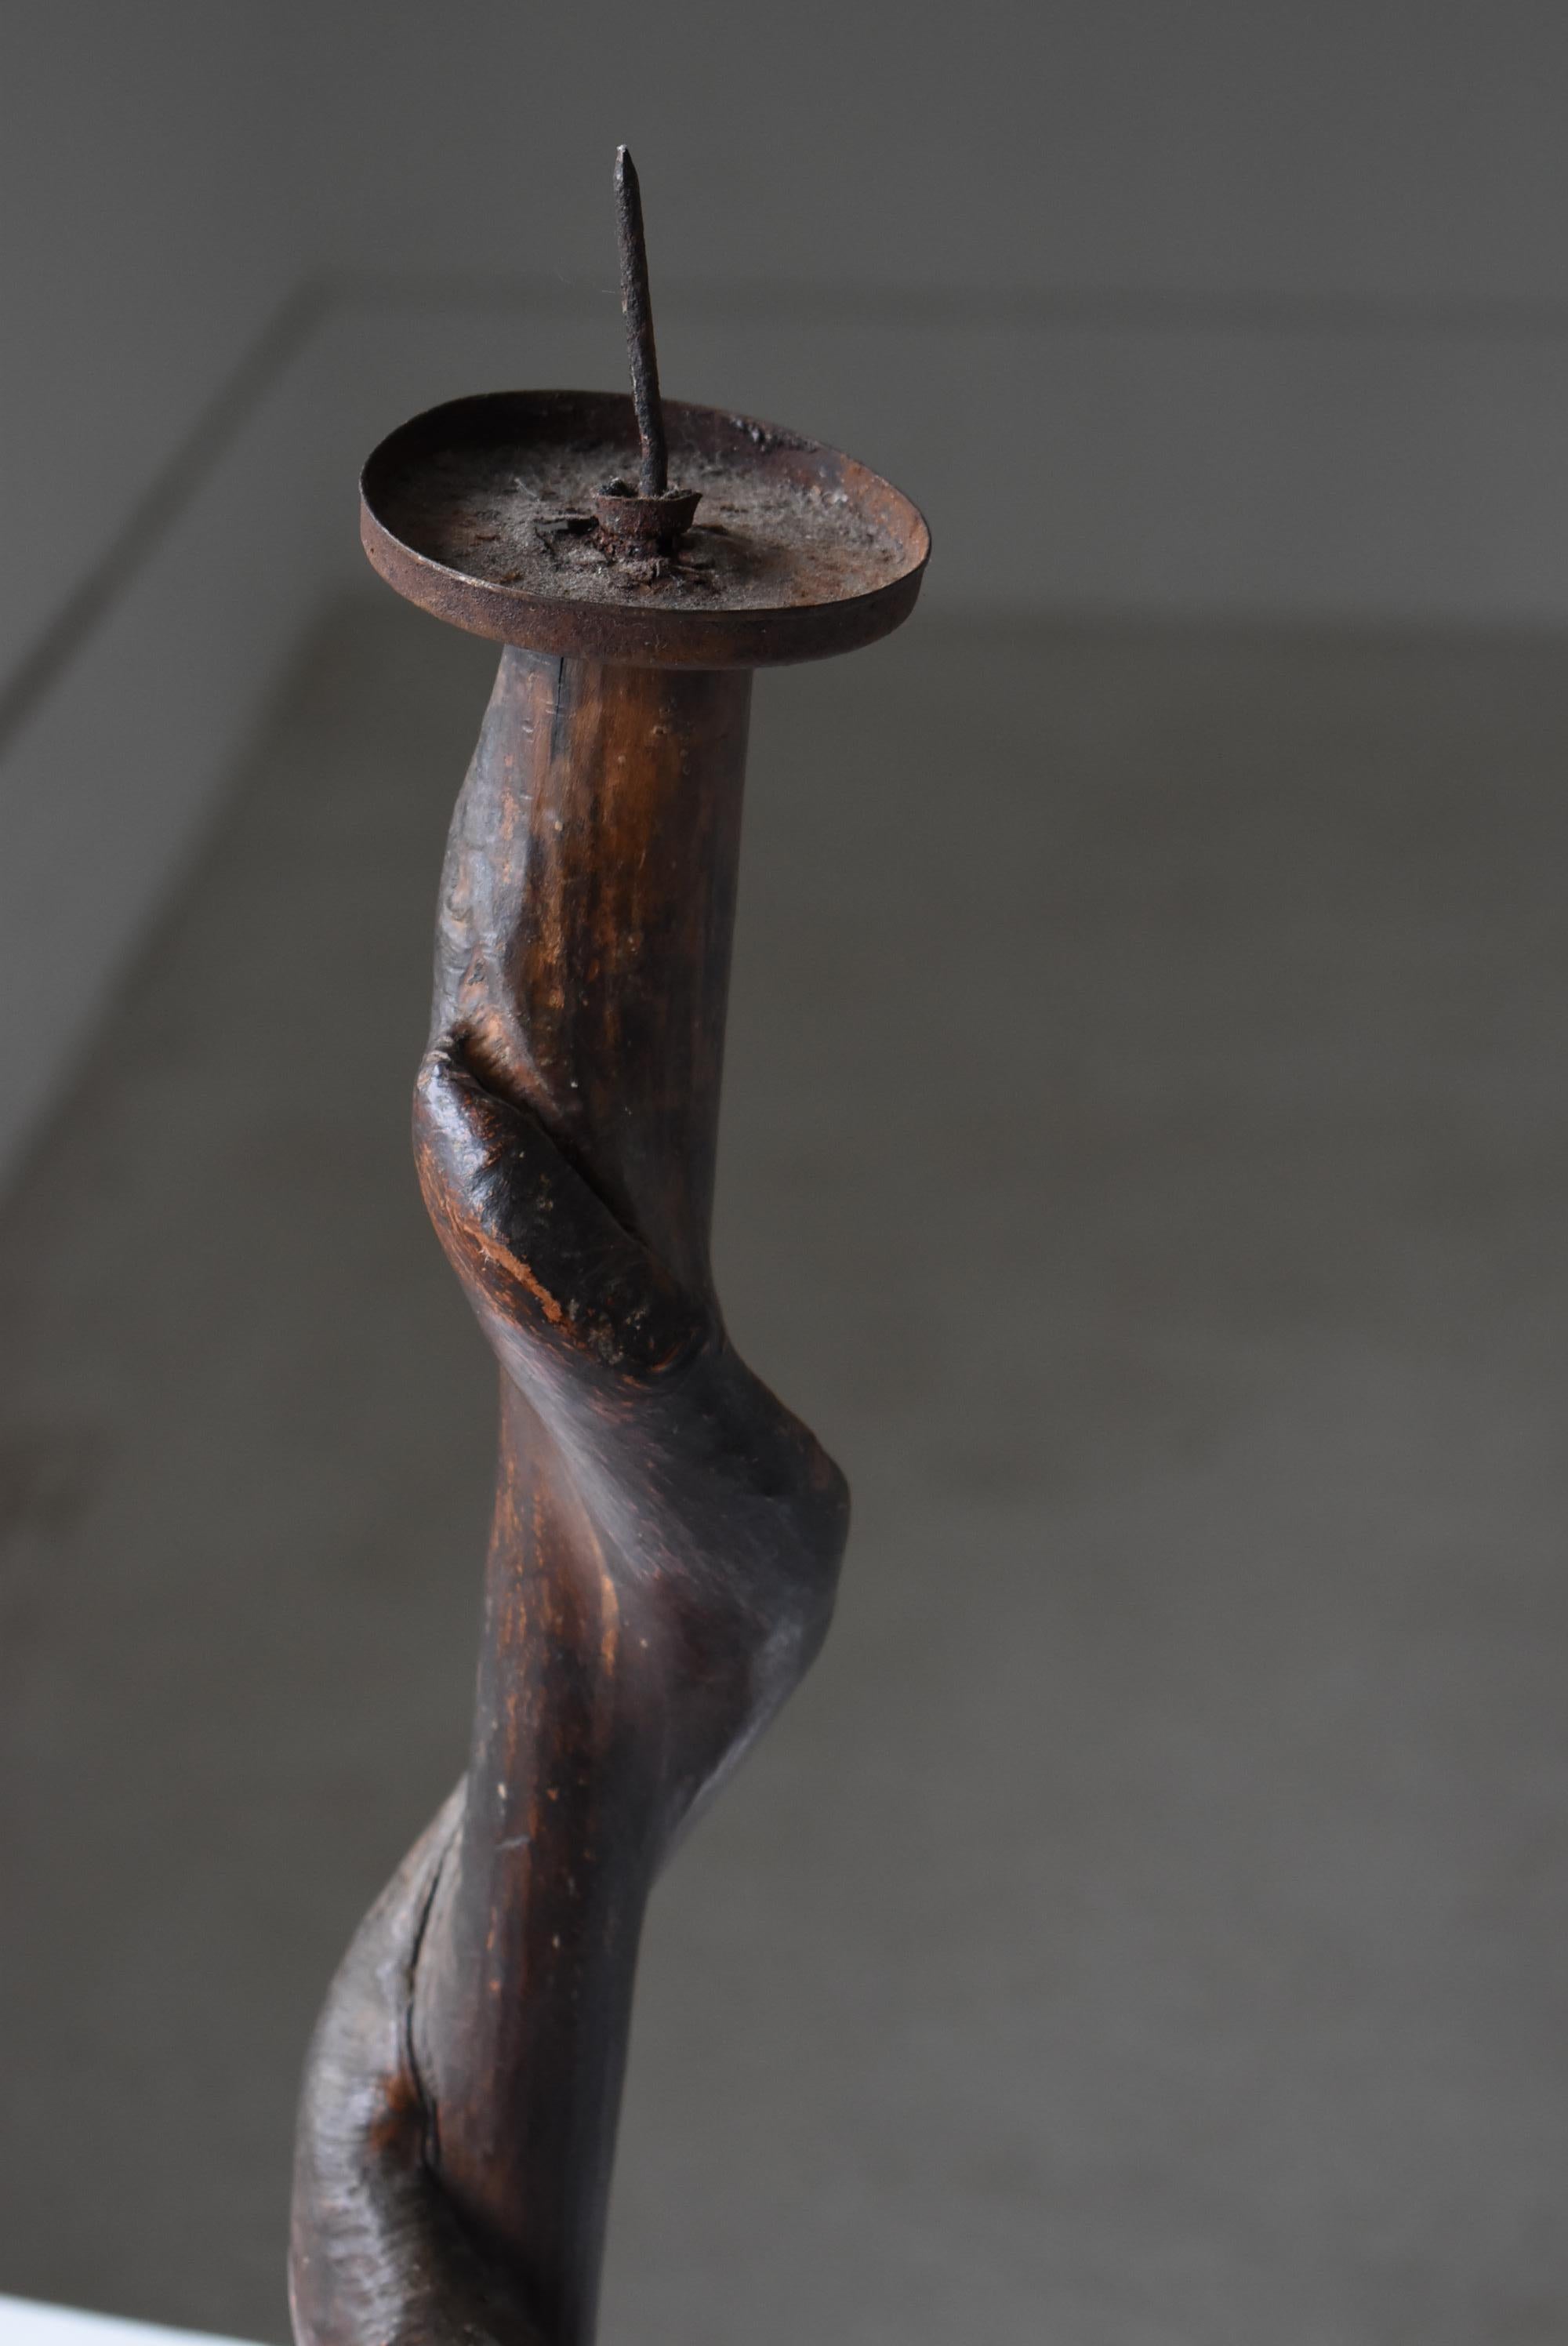 This candelabra is made of very old Japanese natural wood.
This is a rare item from the Edo period (1800s-1860s).
This was a time when poverty was still intense in Japan.
It was made from materials found around us.
It has been a part of Japanese